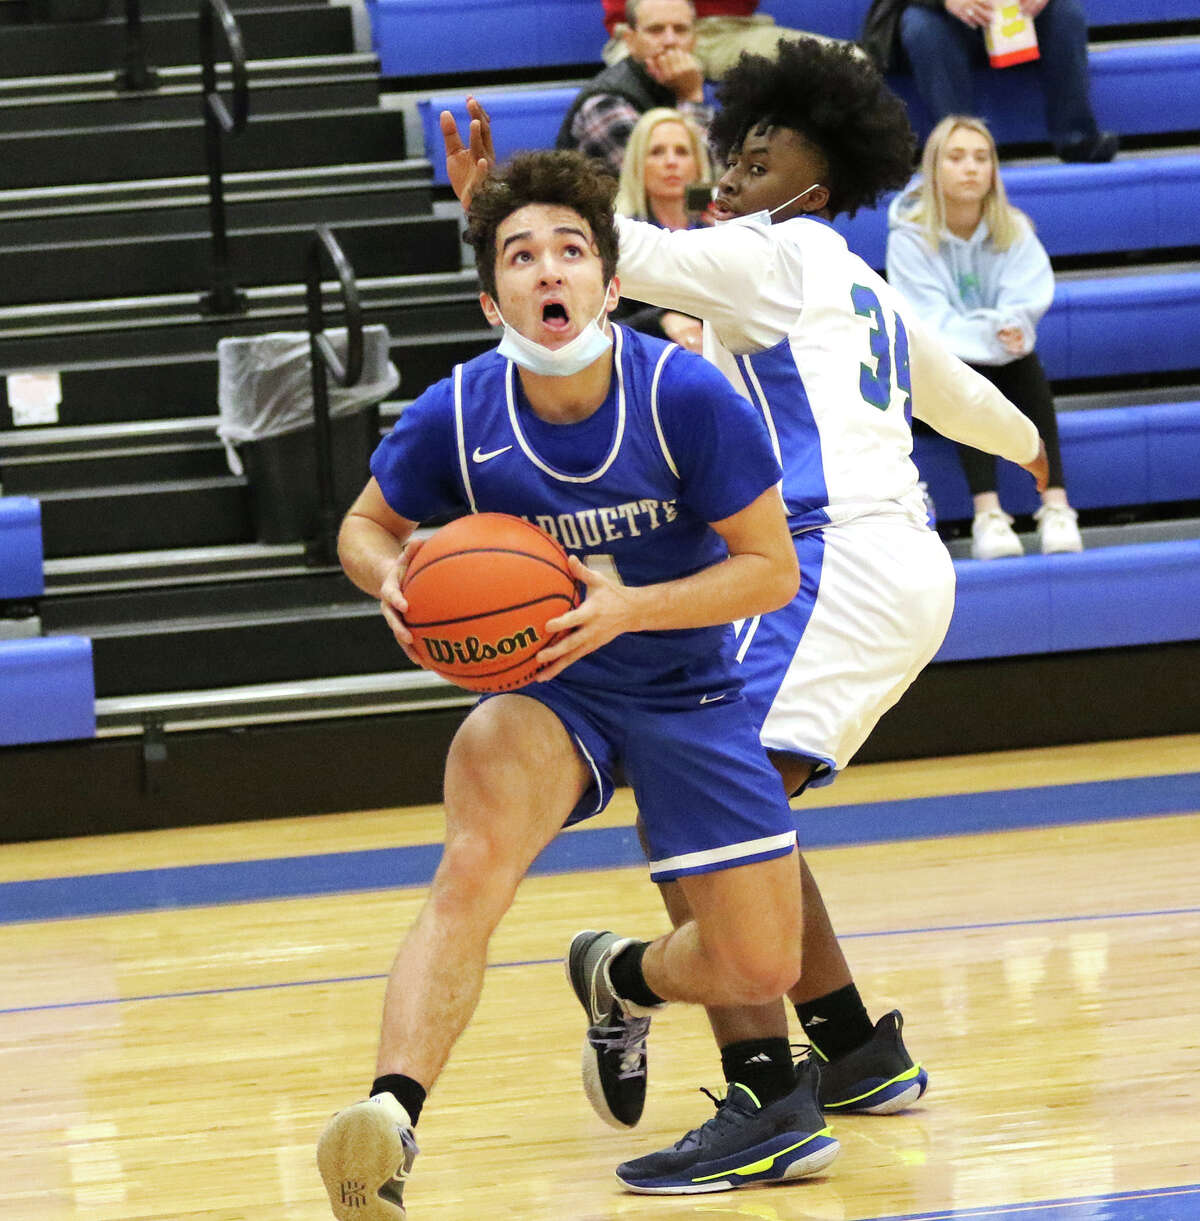 Marquette's Parker Macias (left) scored 17 points Monday to lead the Explorers past Watyerloo in the opening game of pool play at the Columbia-Freeburg Holiday Tournament in Columbia. he is shown in action earlier  this season.